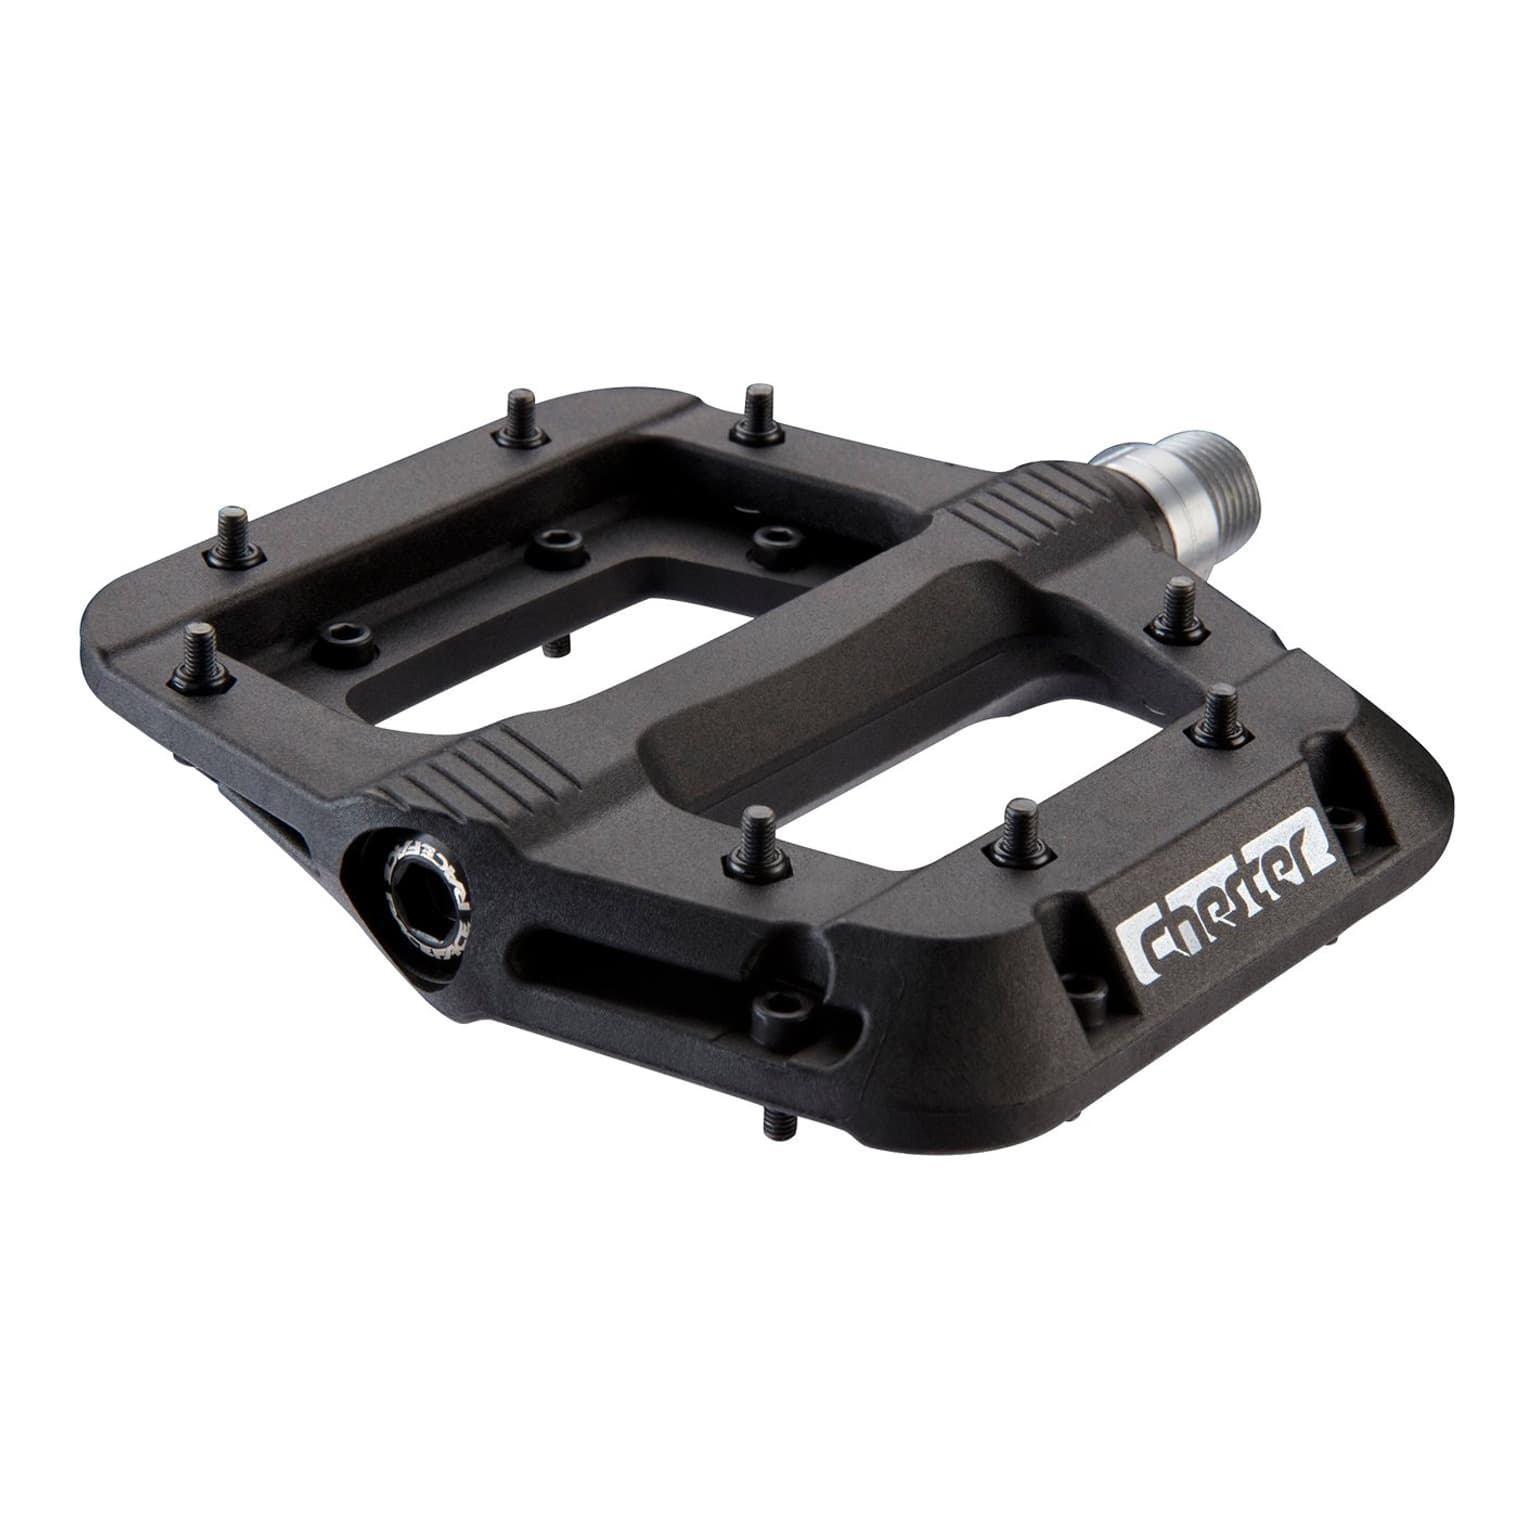 RaceFace RaceFace Chester Pedal V2 Pedale 1